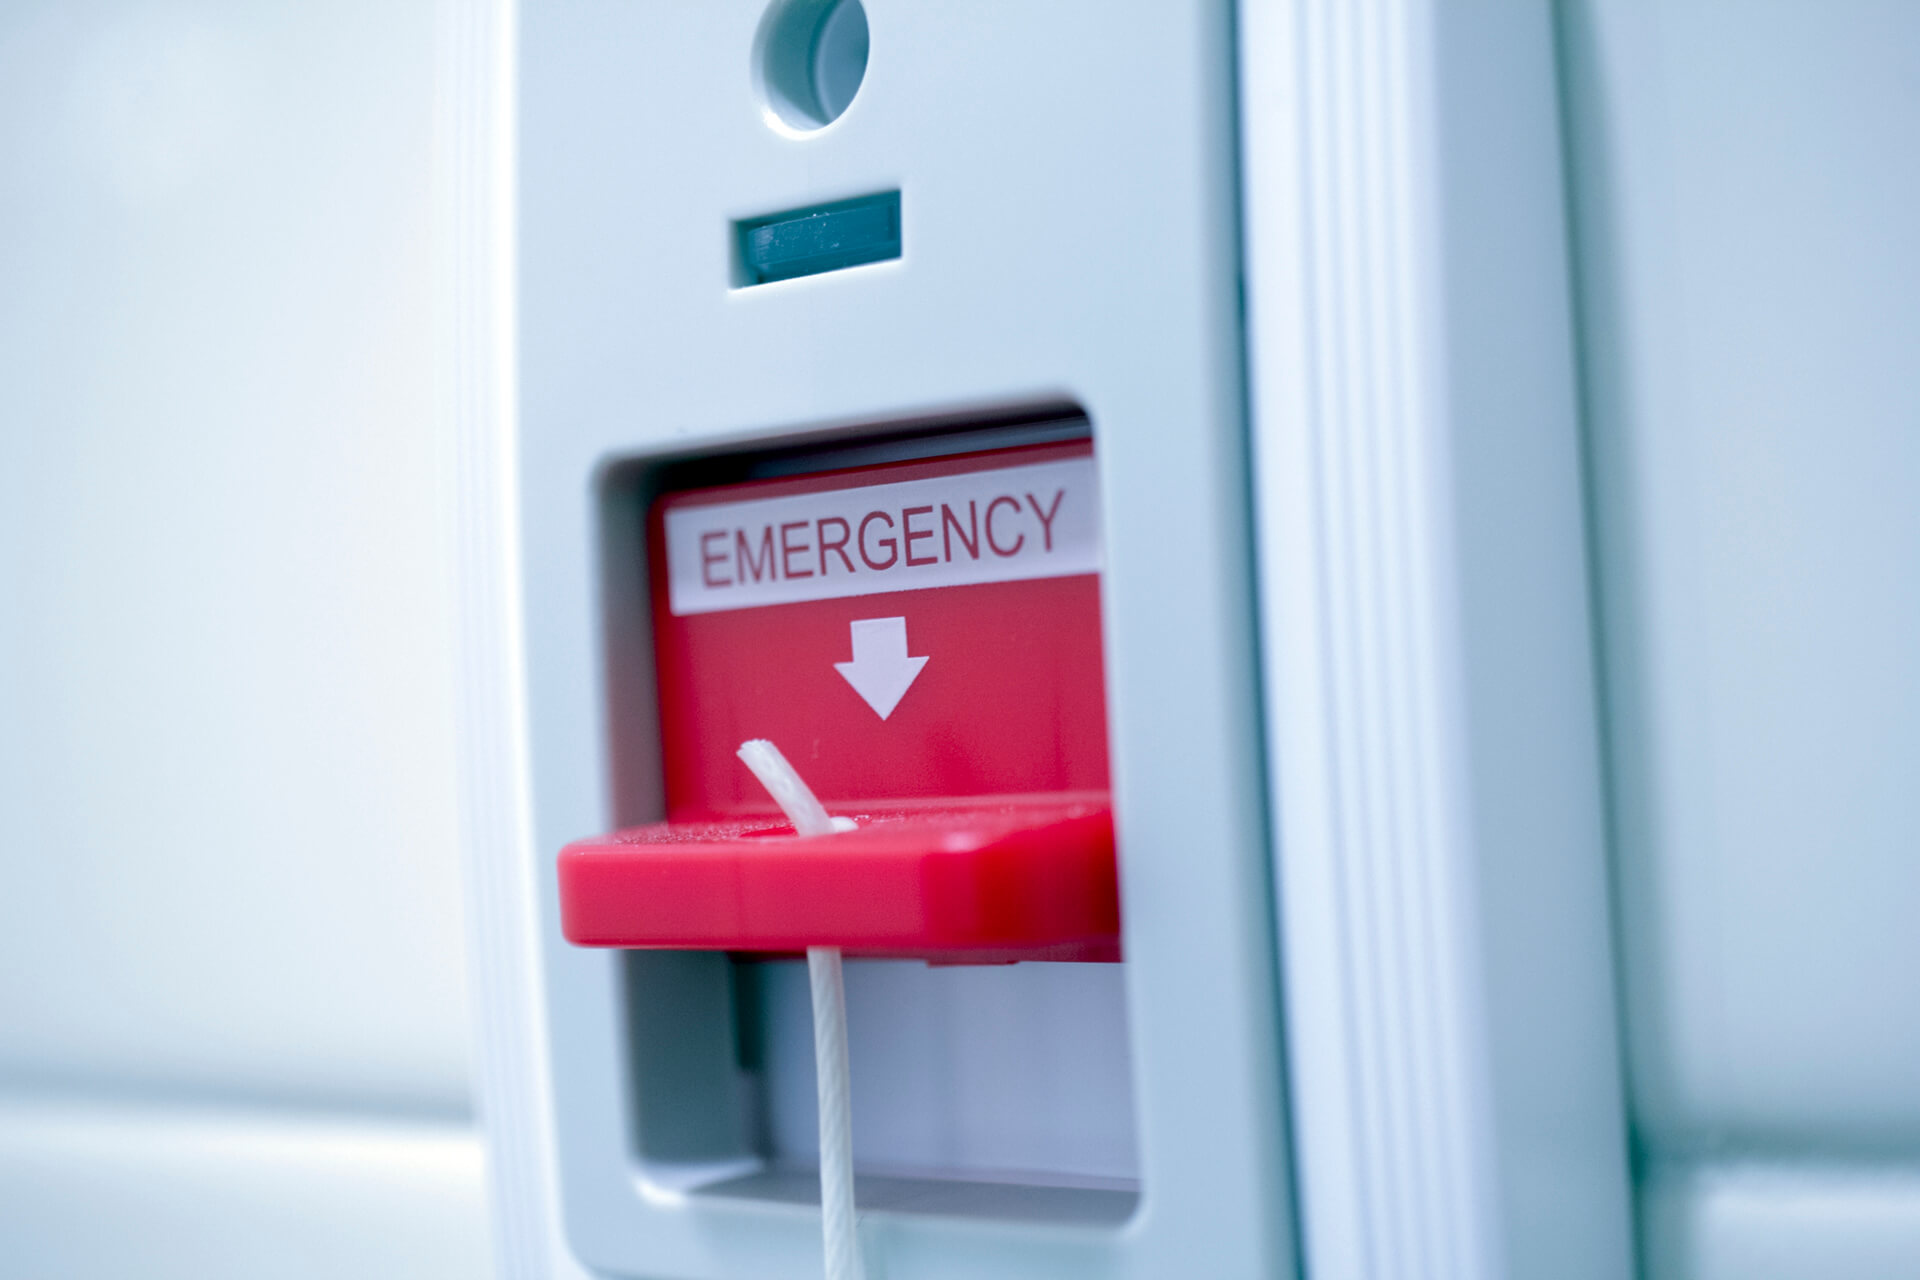 Feel safe and secure with emergency system in rooms